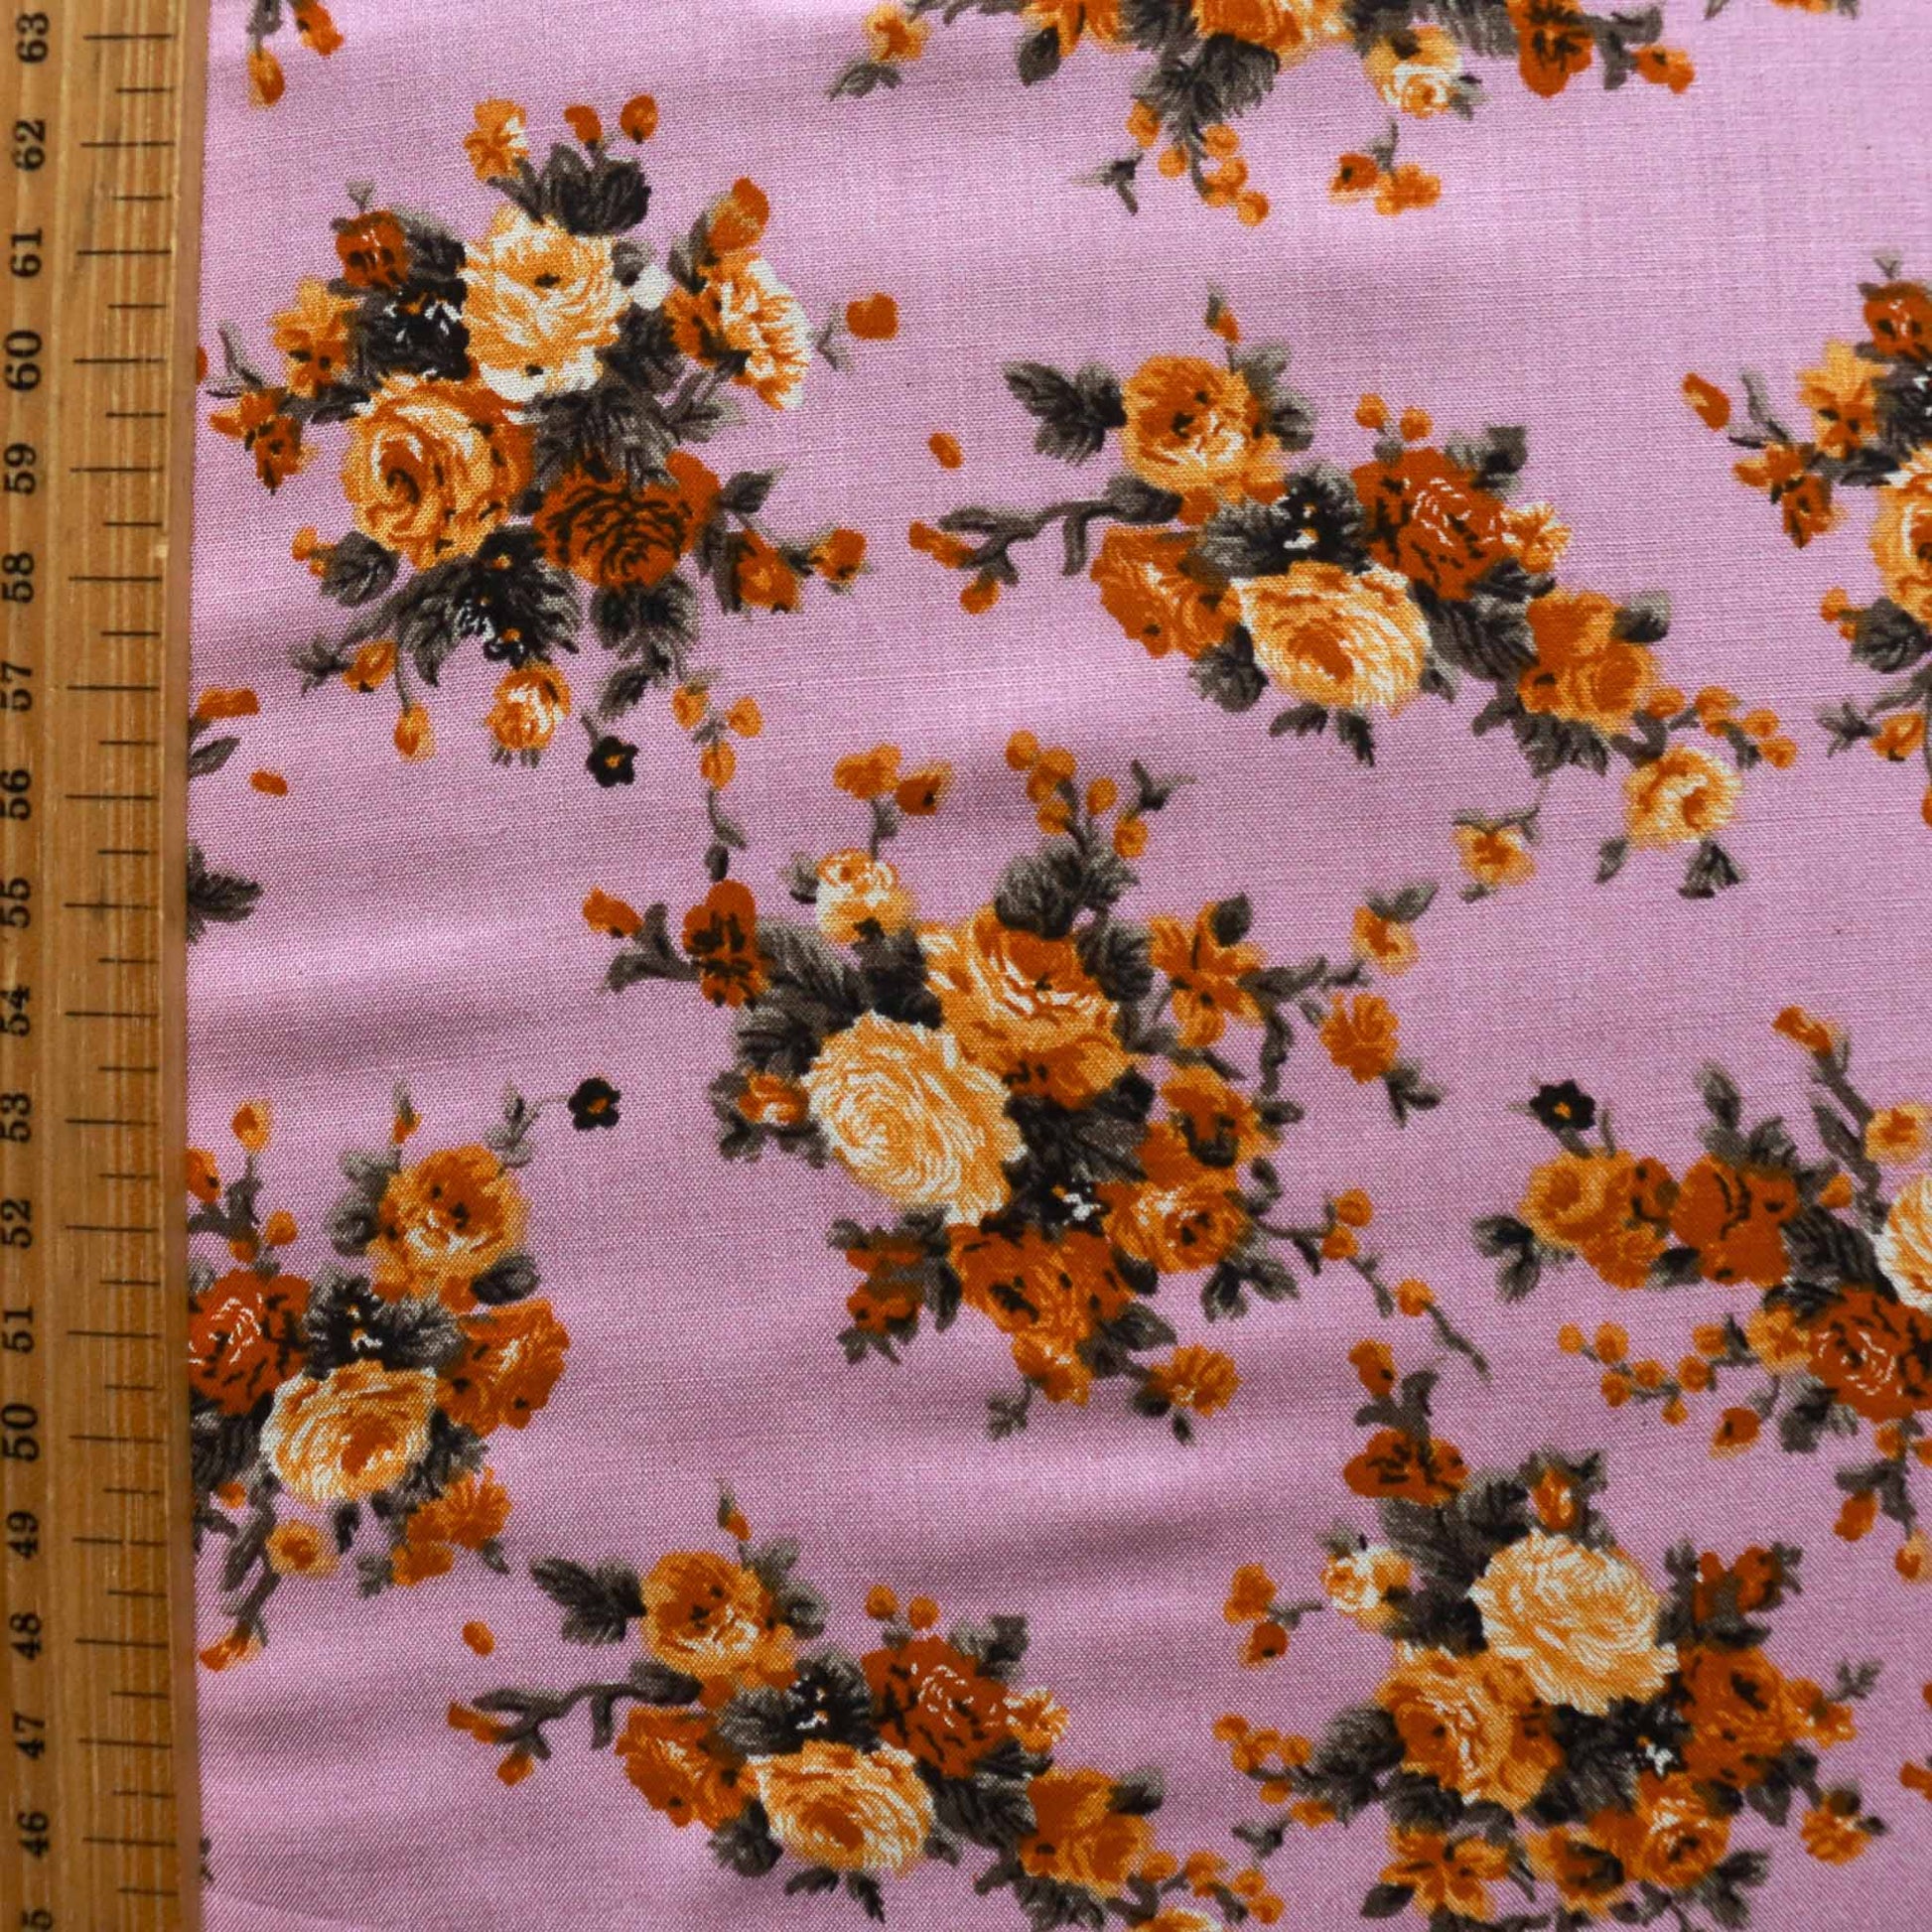 metre lilac viscose challis dressmaking fabric with classic floral print in orange yellow and green